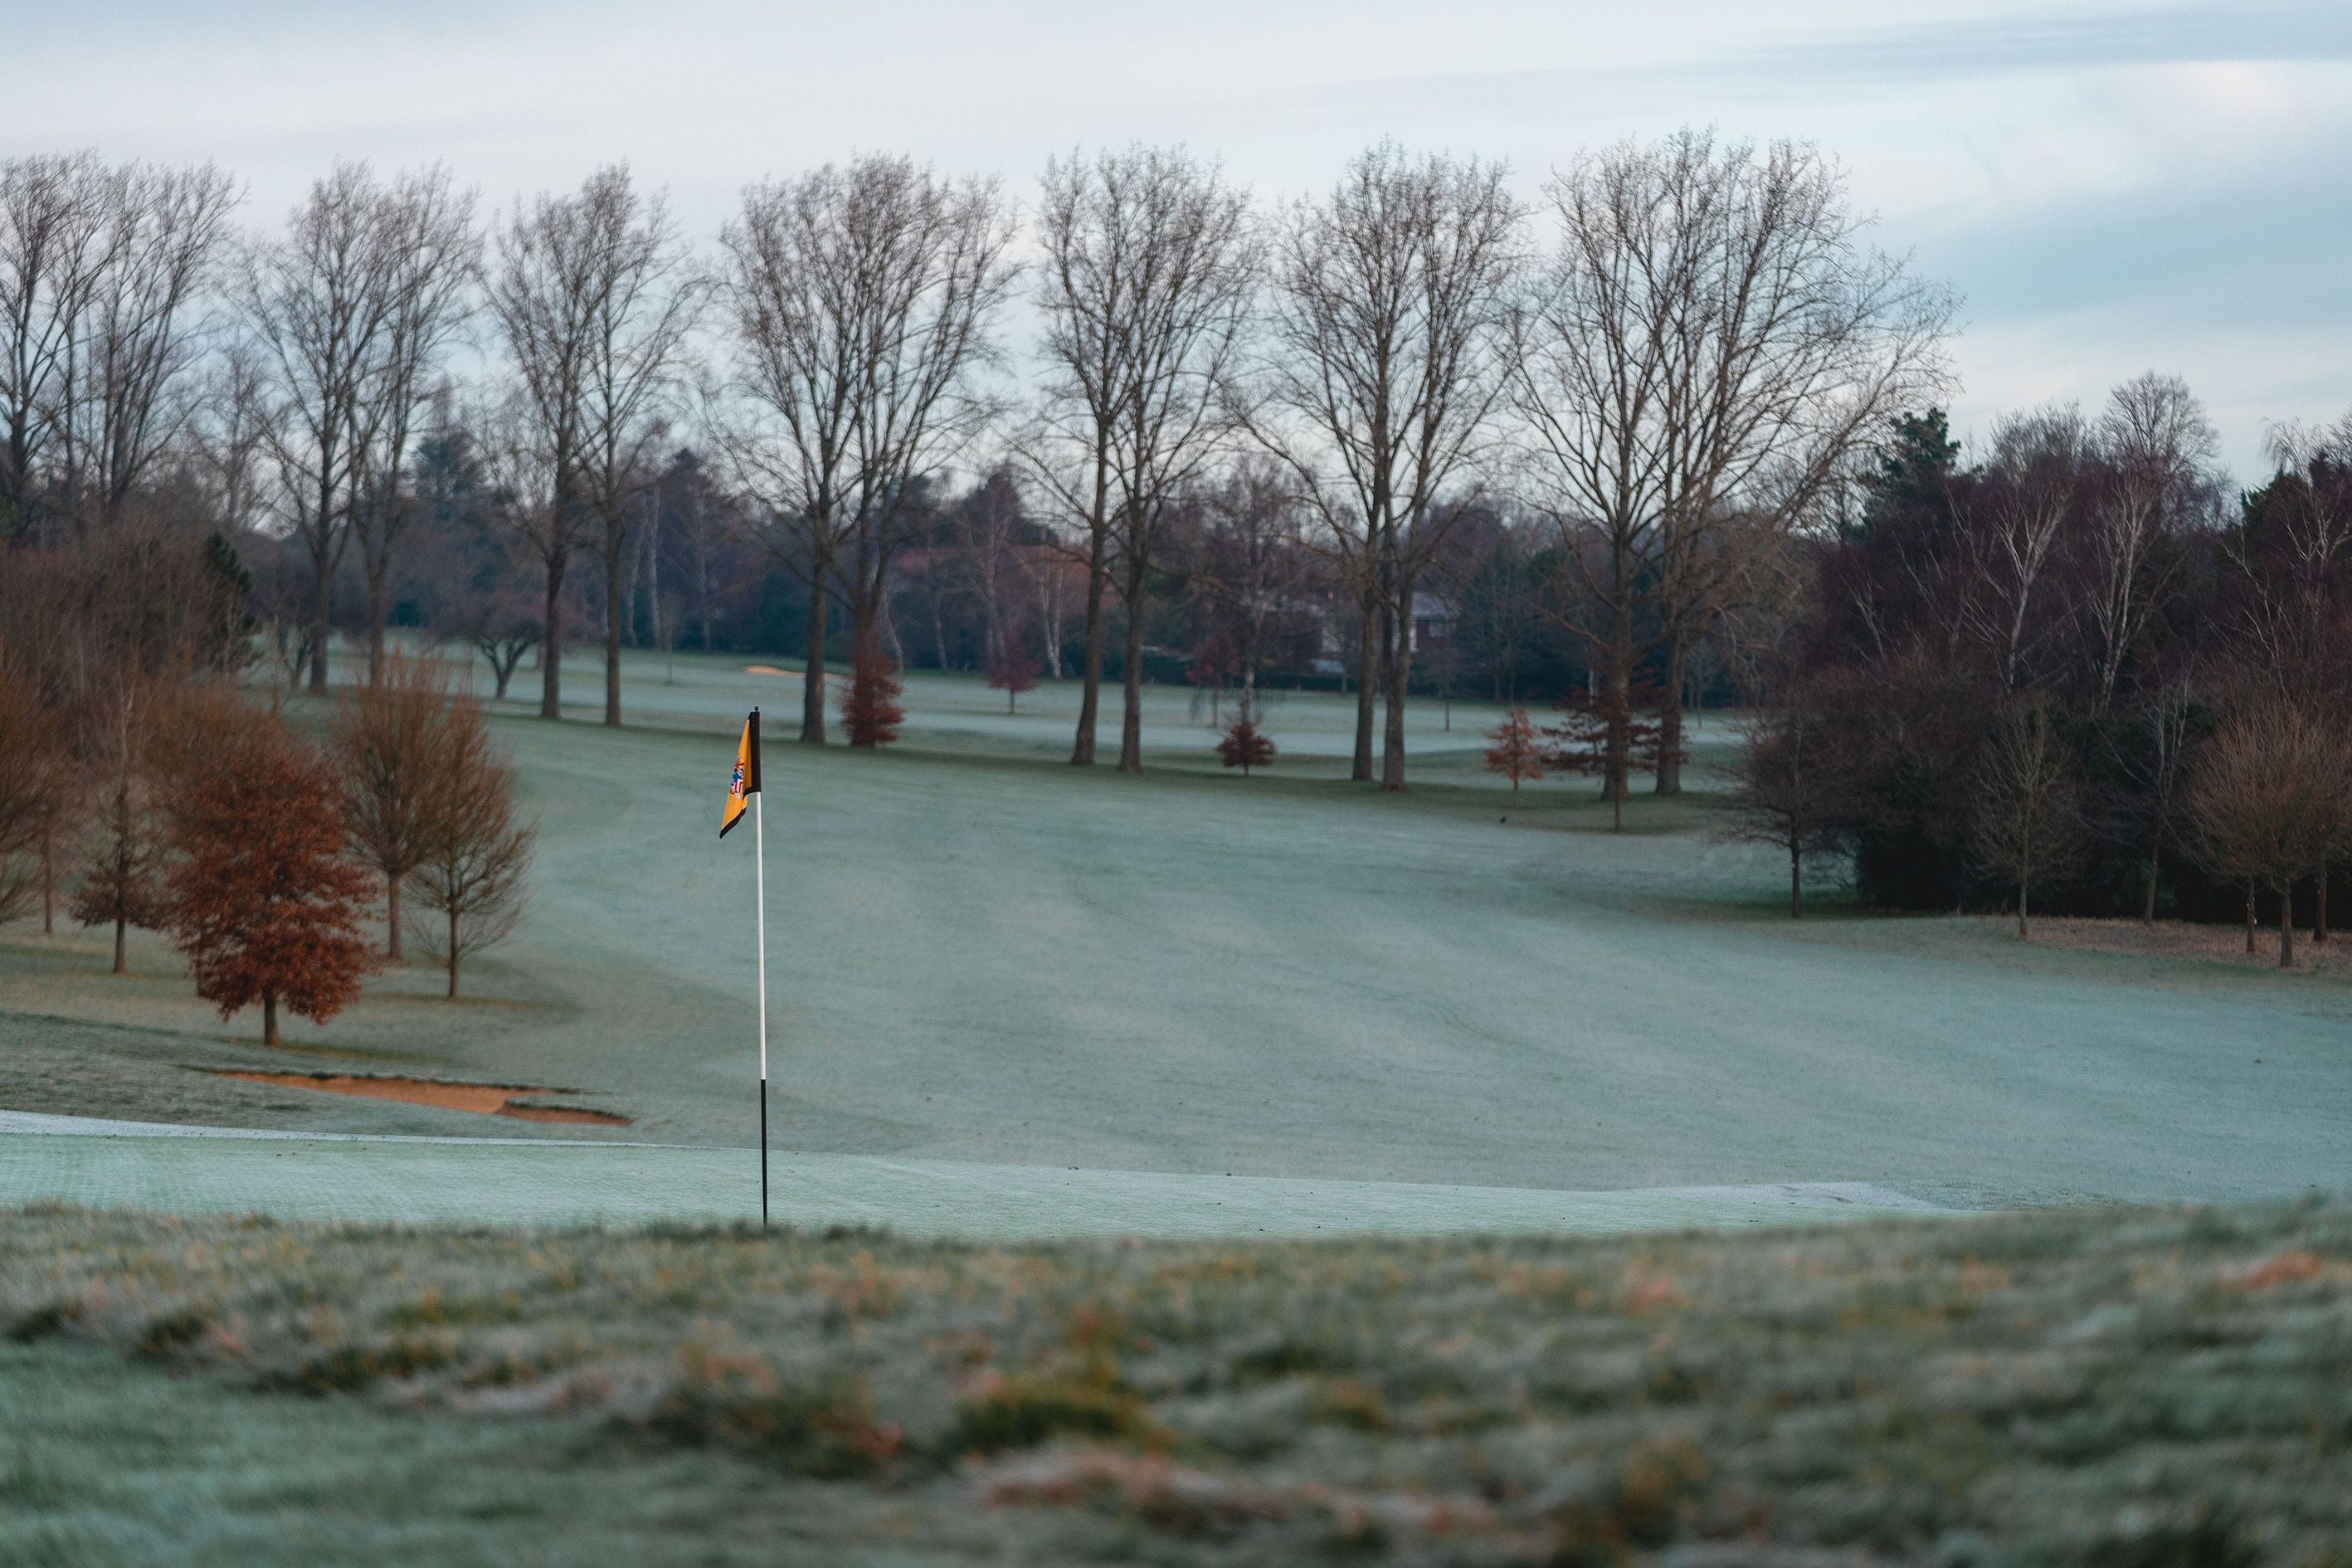 Golf Winter Rules: A Guide